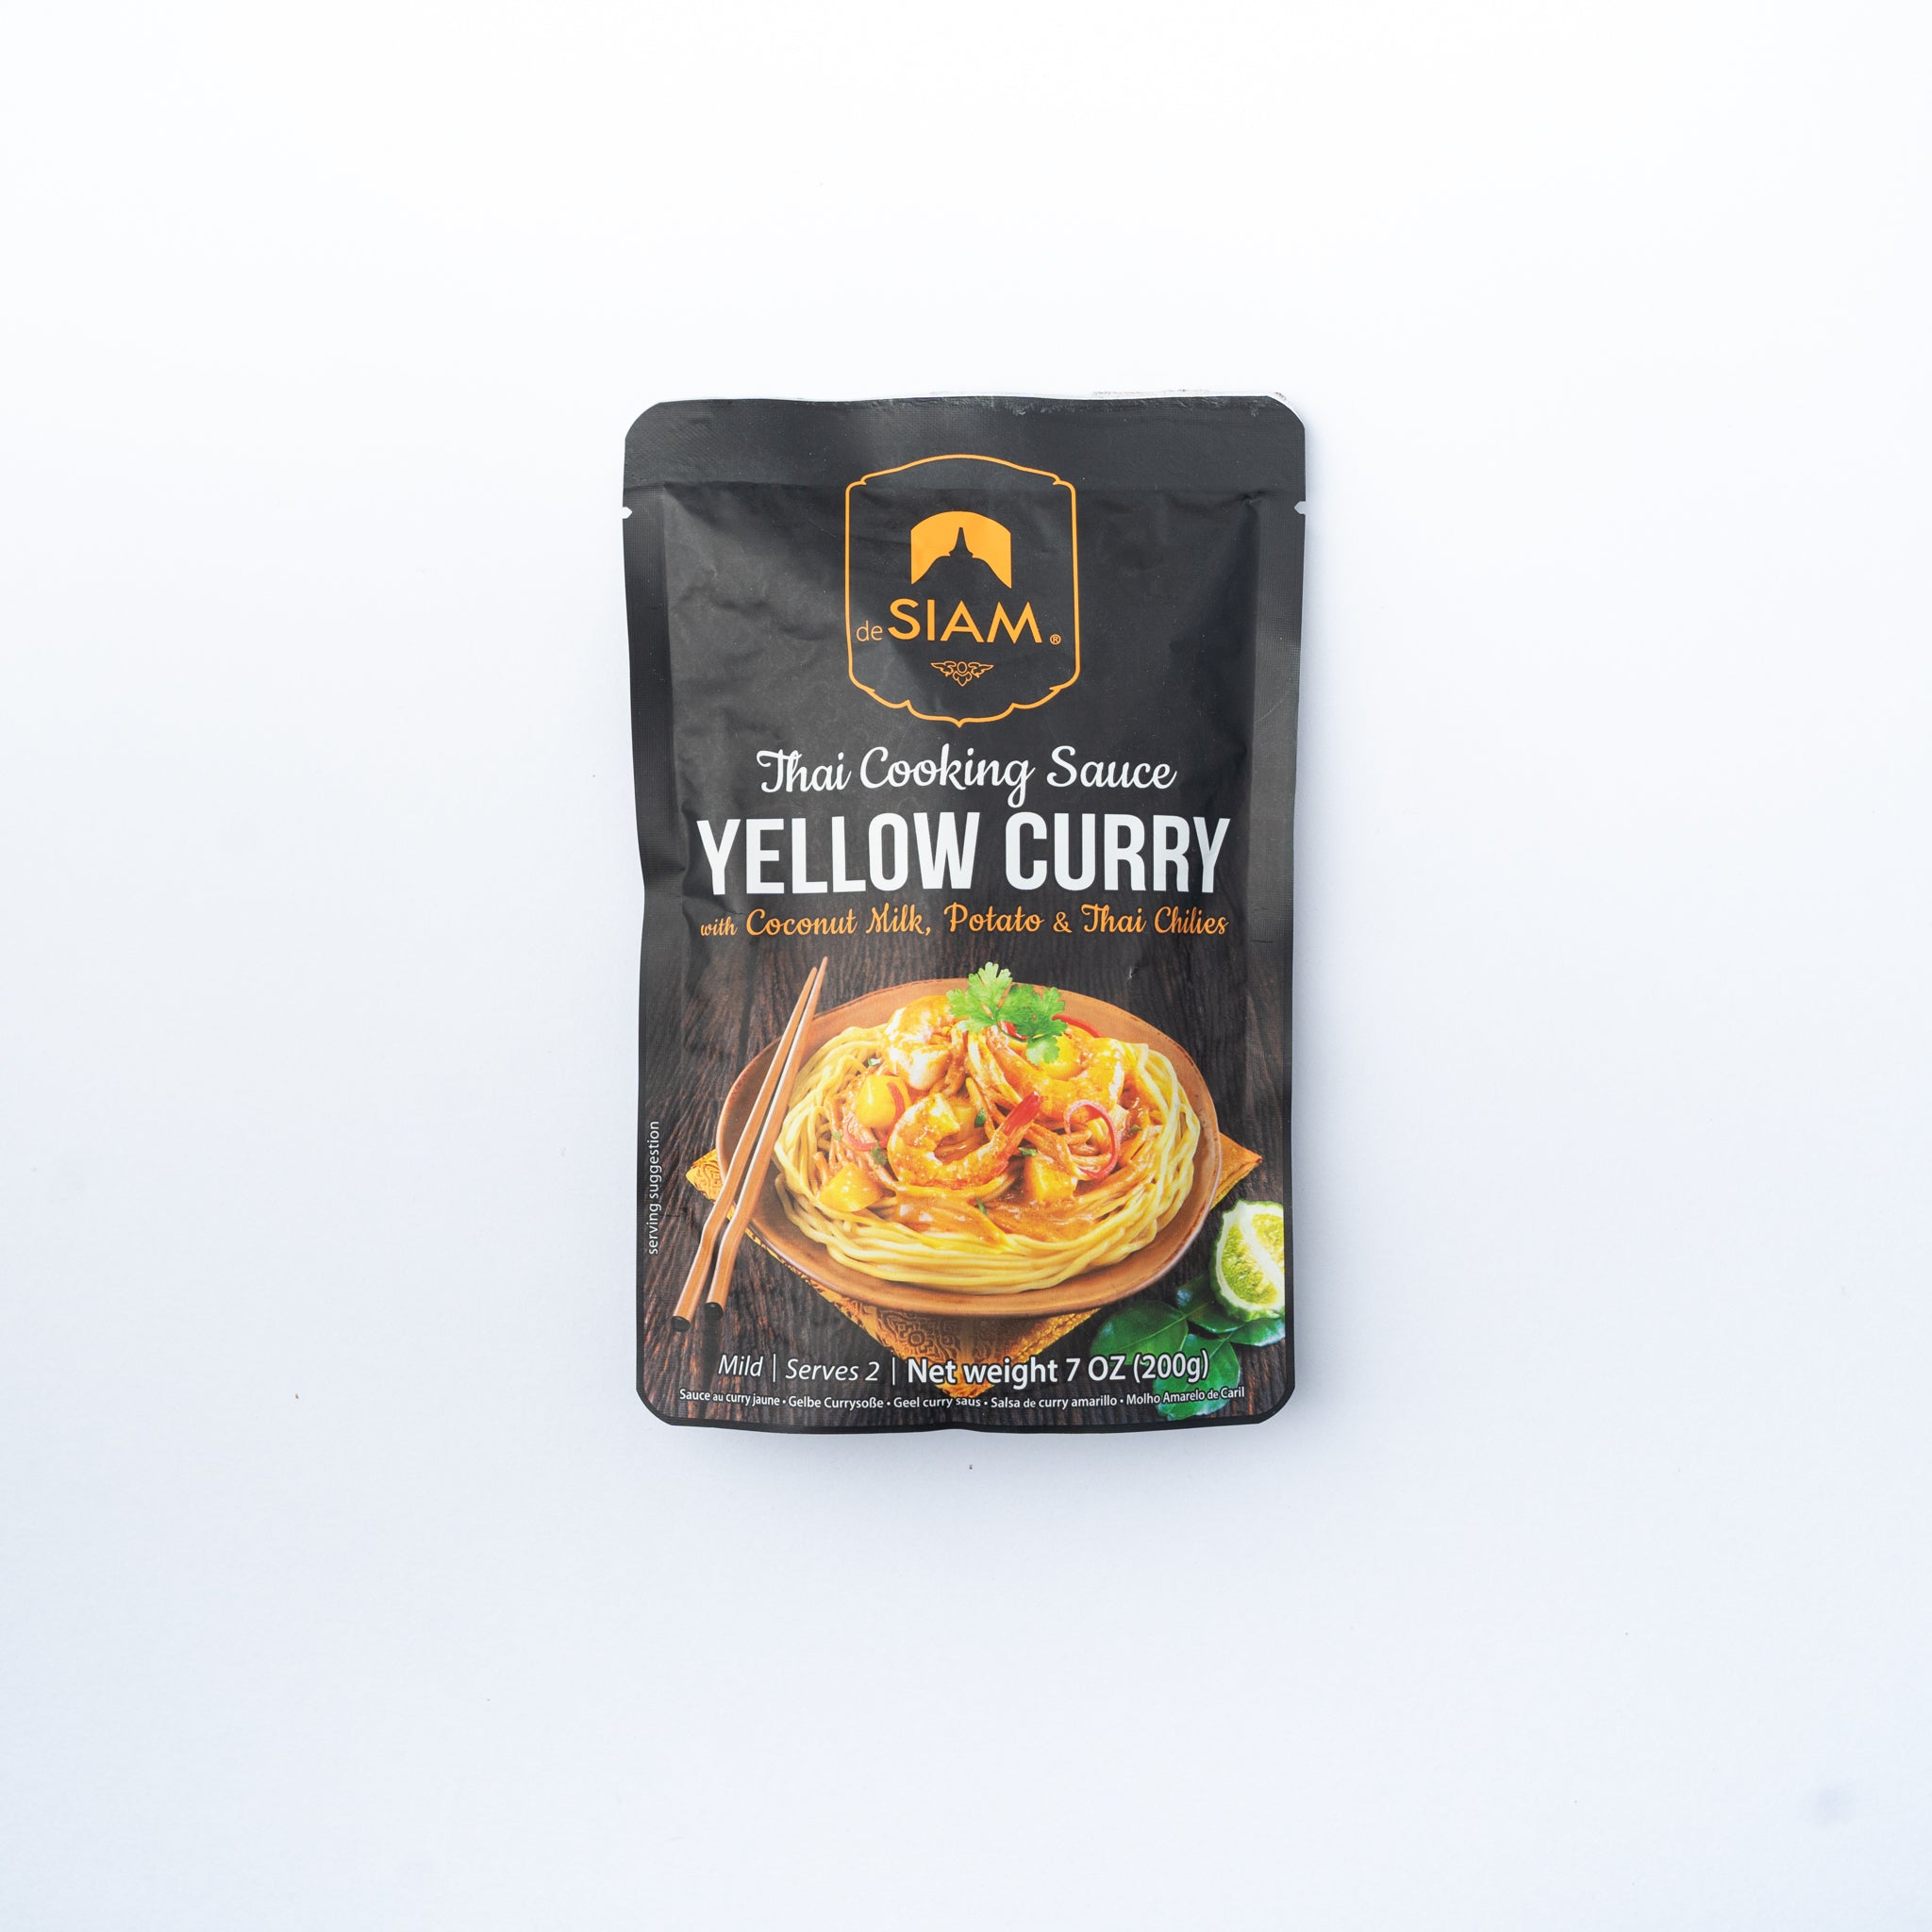 De Siam Thai Cooking Sauce Yellow Curry 200g